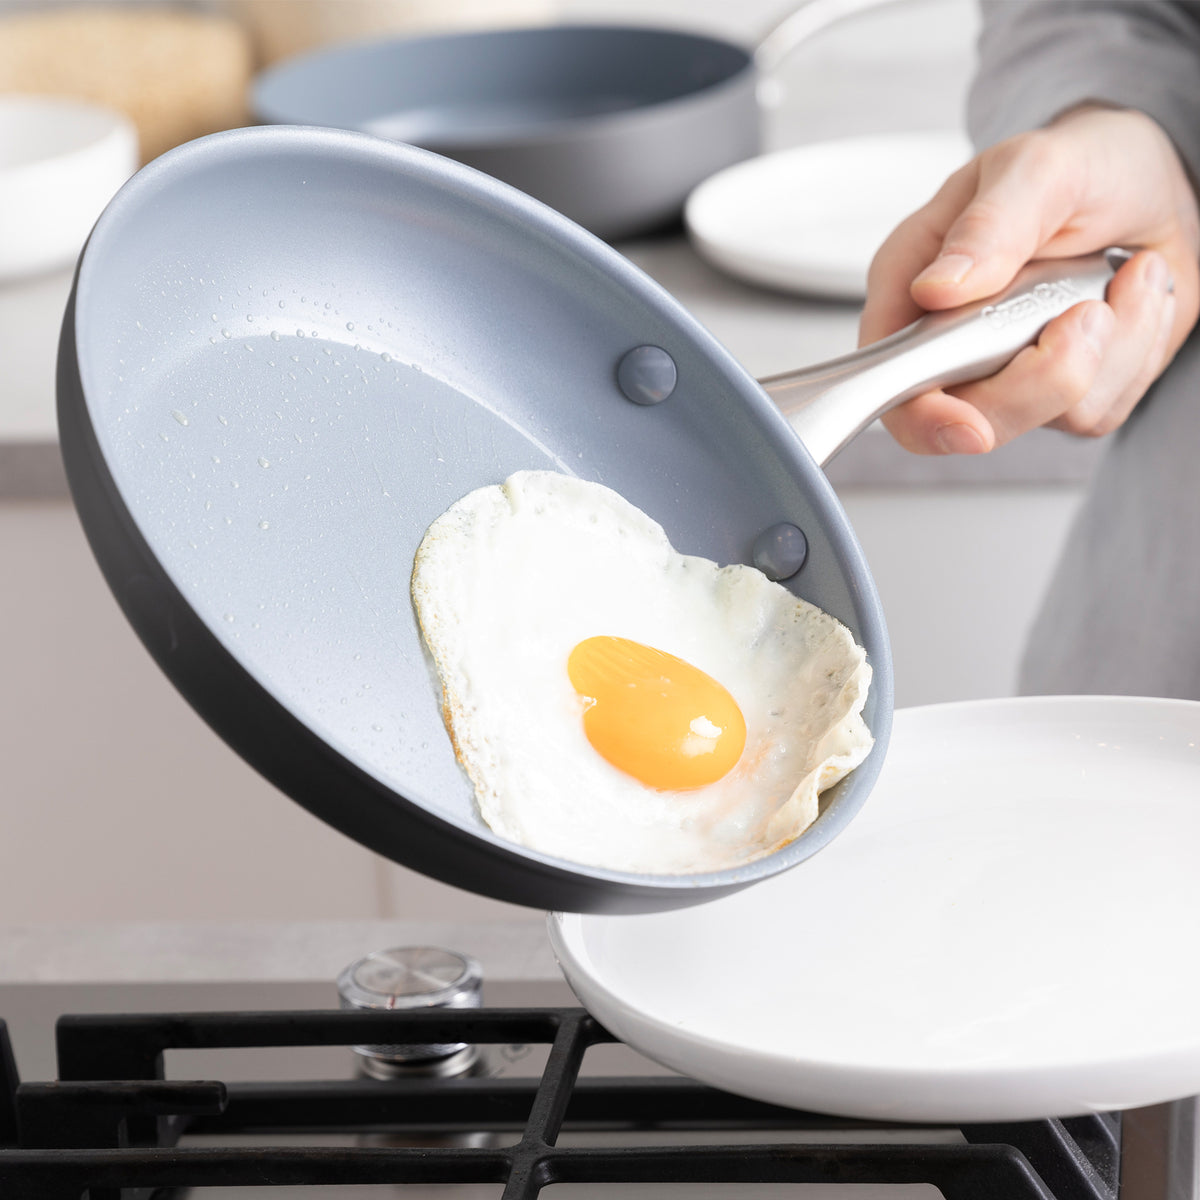 9 Inch Healthy Green Ceramic Non Stick Fry/Frying Pans,Small egg